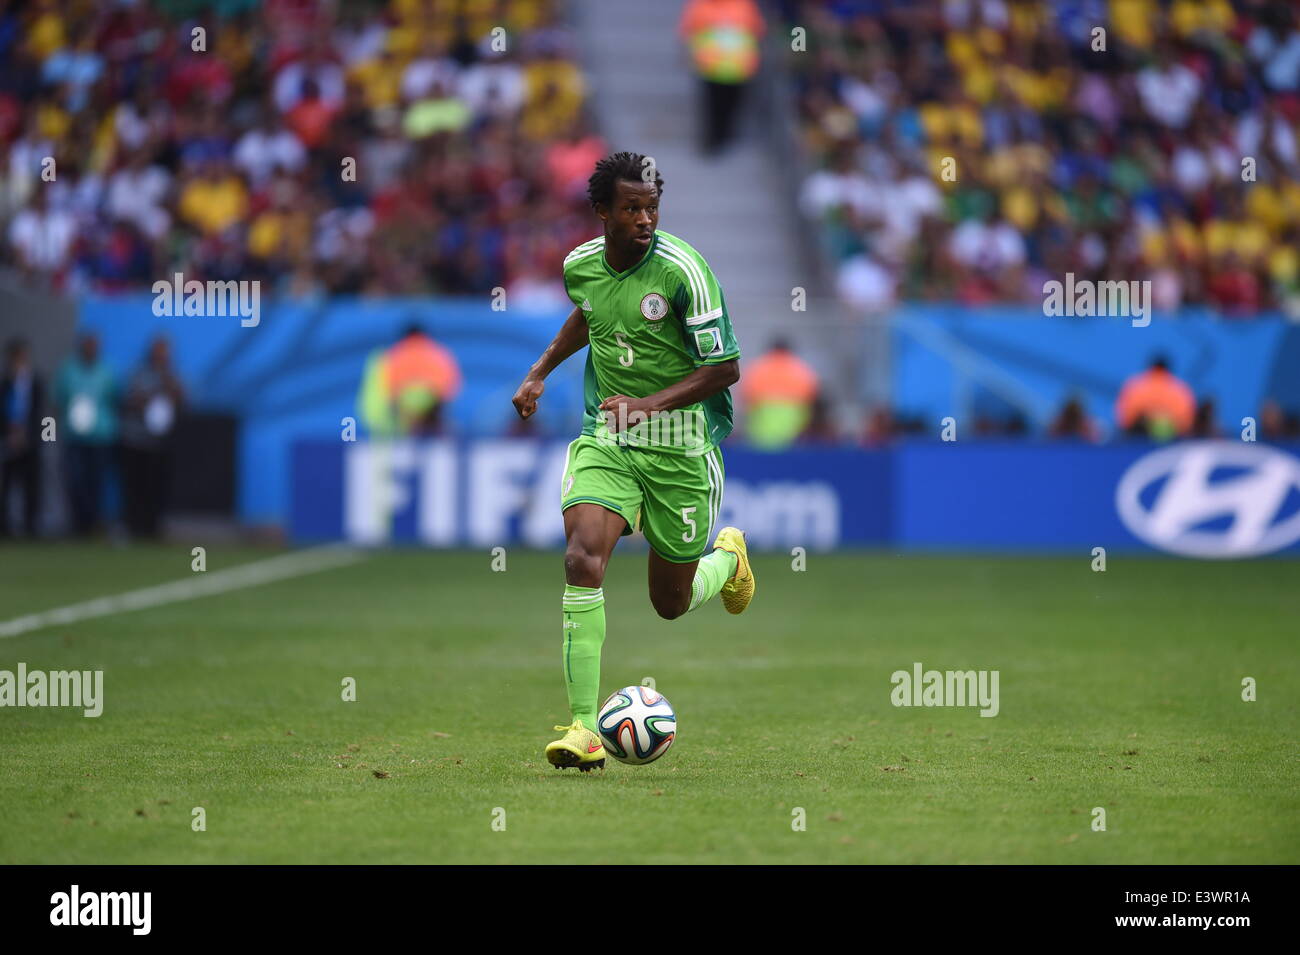 Brasilia, Brazil. 30th June, 2014. Efe Ambrose of Nigeria in action during the FIFA World Cup 2014 round of 16 match between France and Nigeria at the Estadio National Stadium in Brasilia, Brazil, on 30 June 2014. Credit:  dpa picture alliance/Alamy Live News Stock Photo